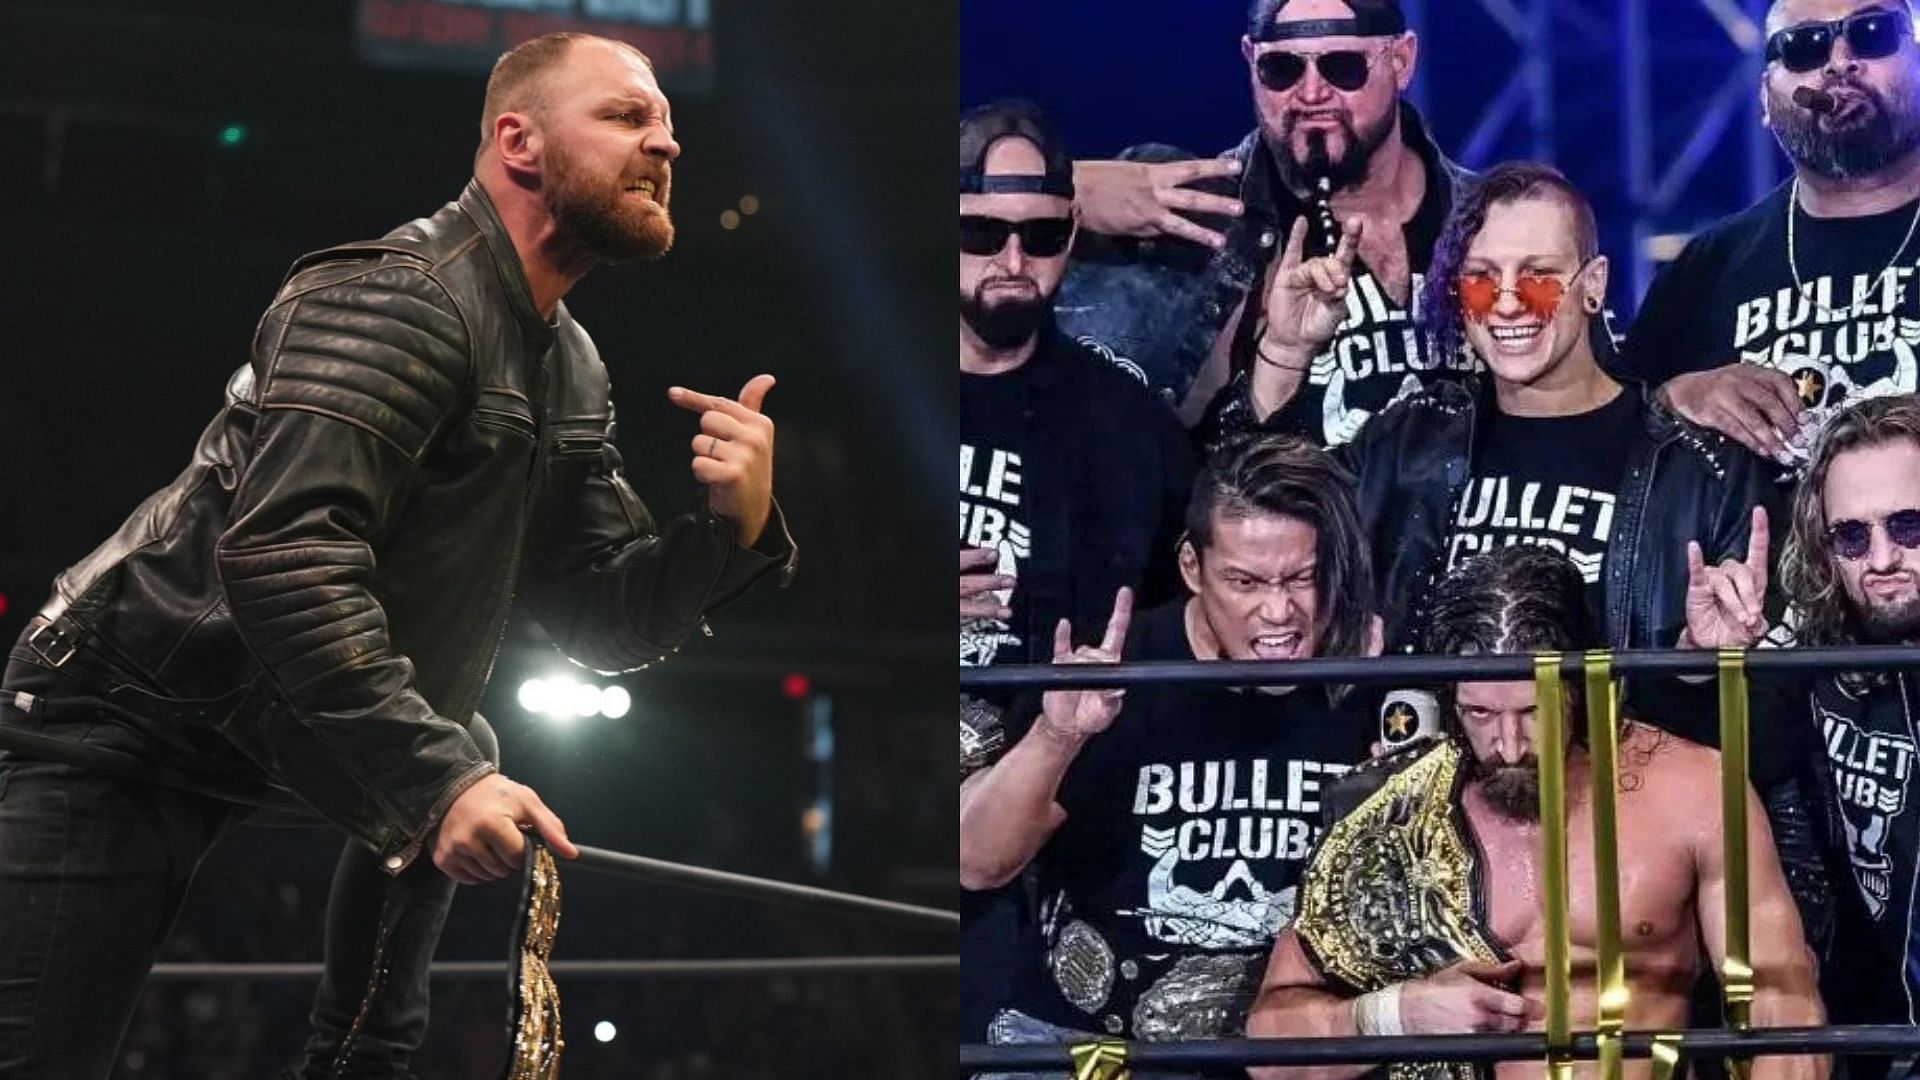 Jon Moxley appeared returned to NJPW to battle the Bullet Club and Team Filthy